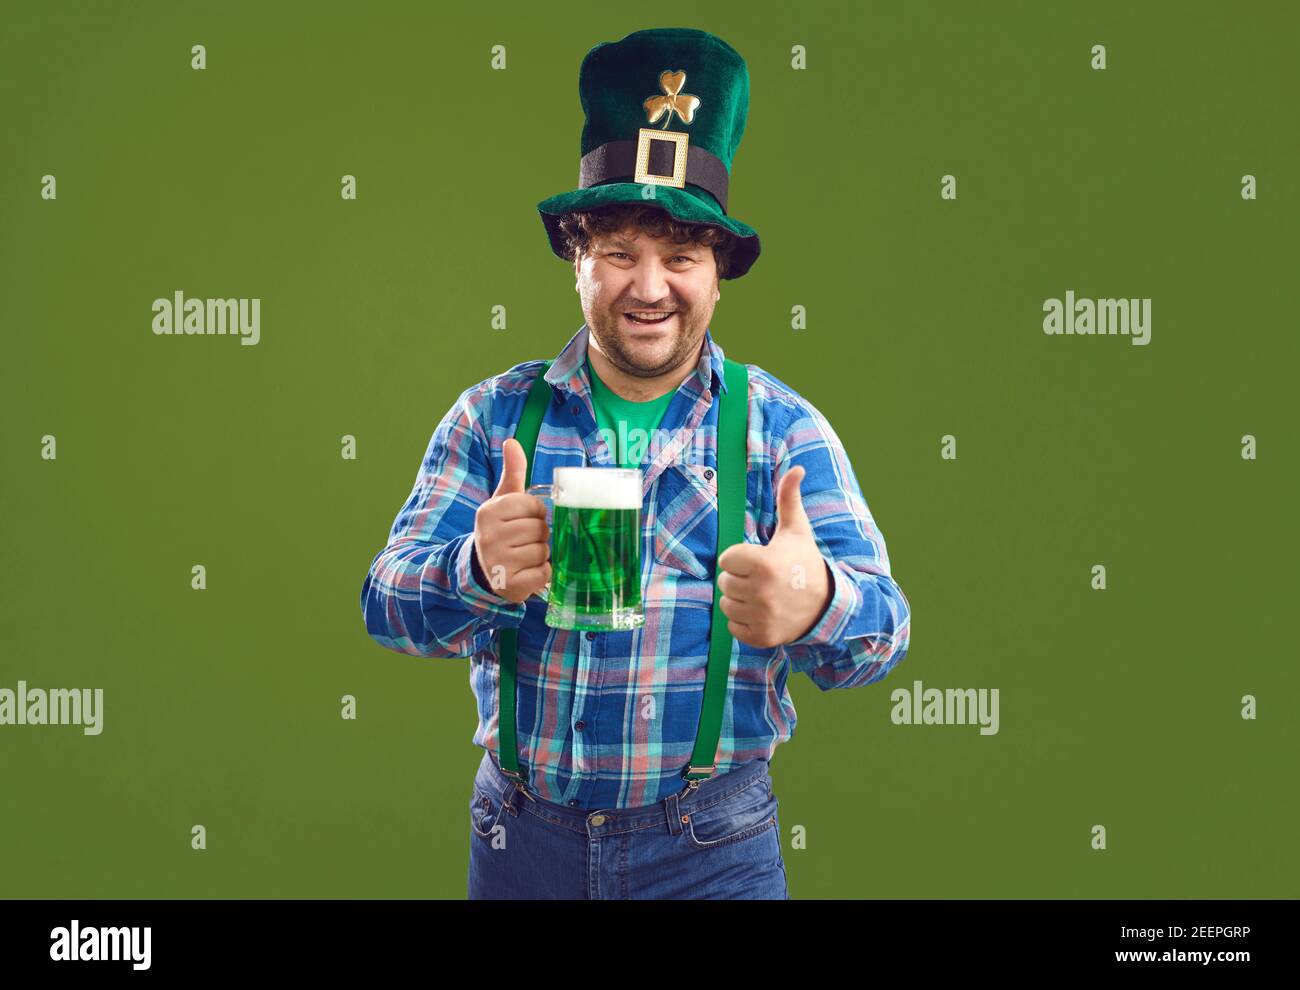 Positive man with green beer showing thumbs up during Patrick day Stock Photo